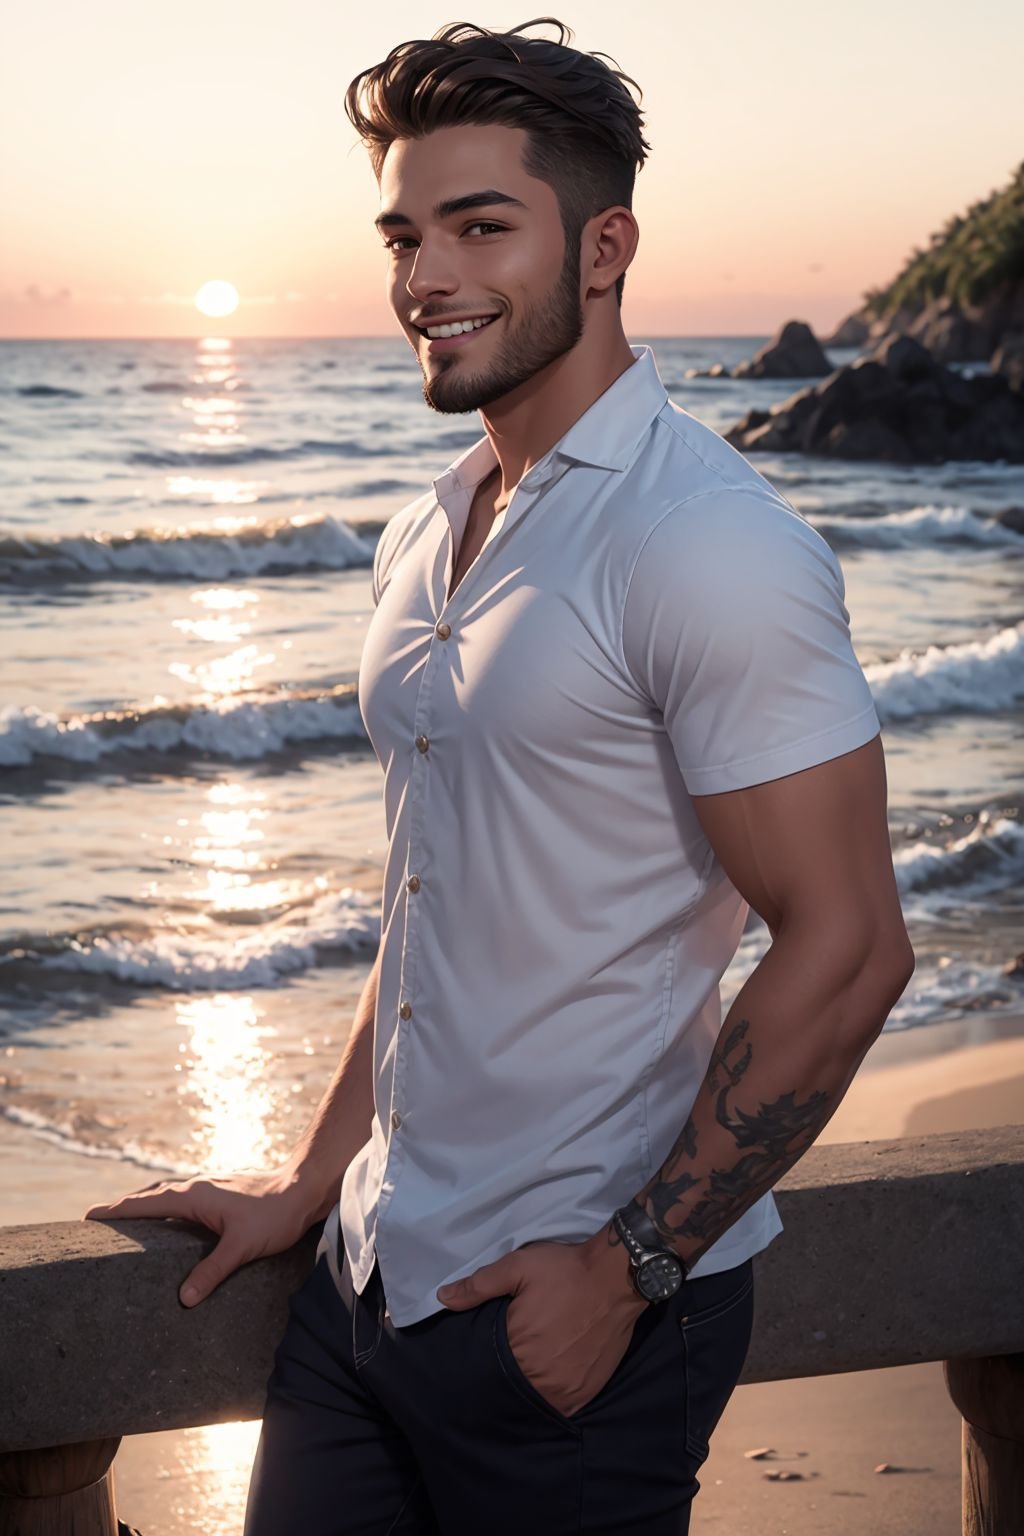 masterpiece, 4k, extreme resolution, highly intricate, studio quality, extremely detailed, handsome young man, three day beard, beach sunset, (casual attire:0.75), rolled-up sleeves, carefree grin, ocean breeze, relaxed confidence, coastal allure, edge lighting, smooth shading